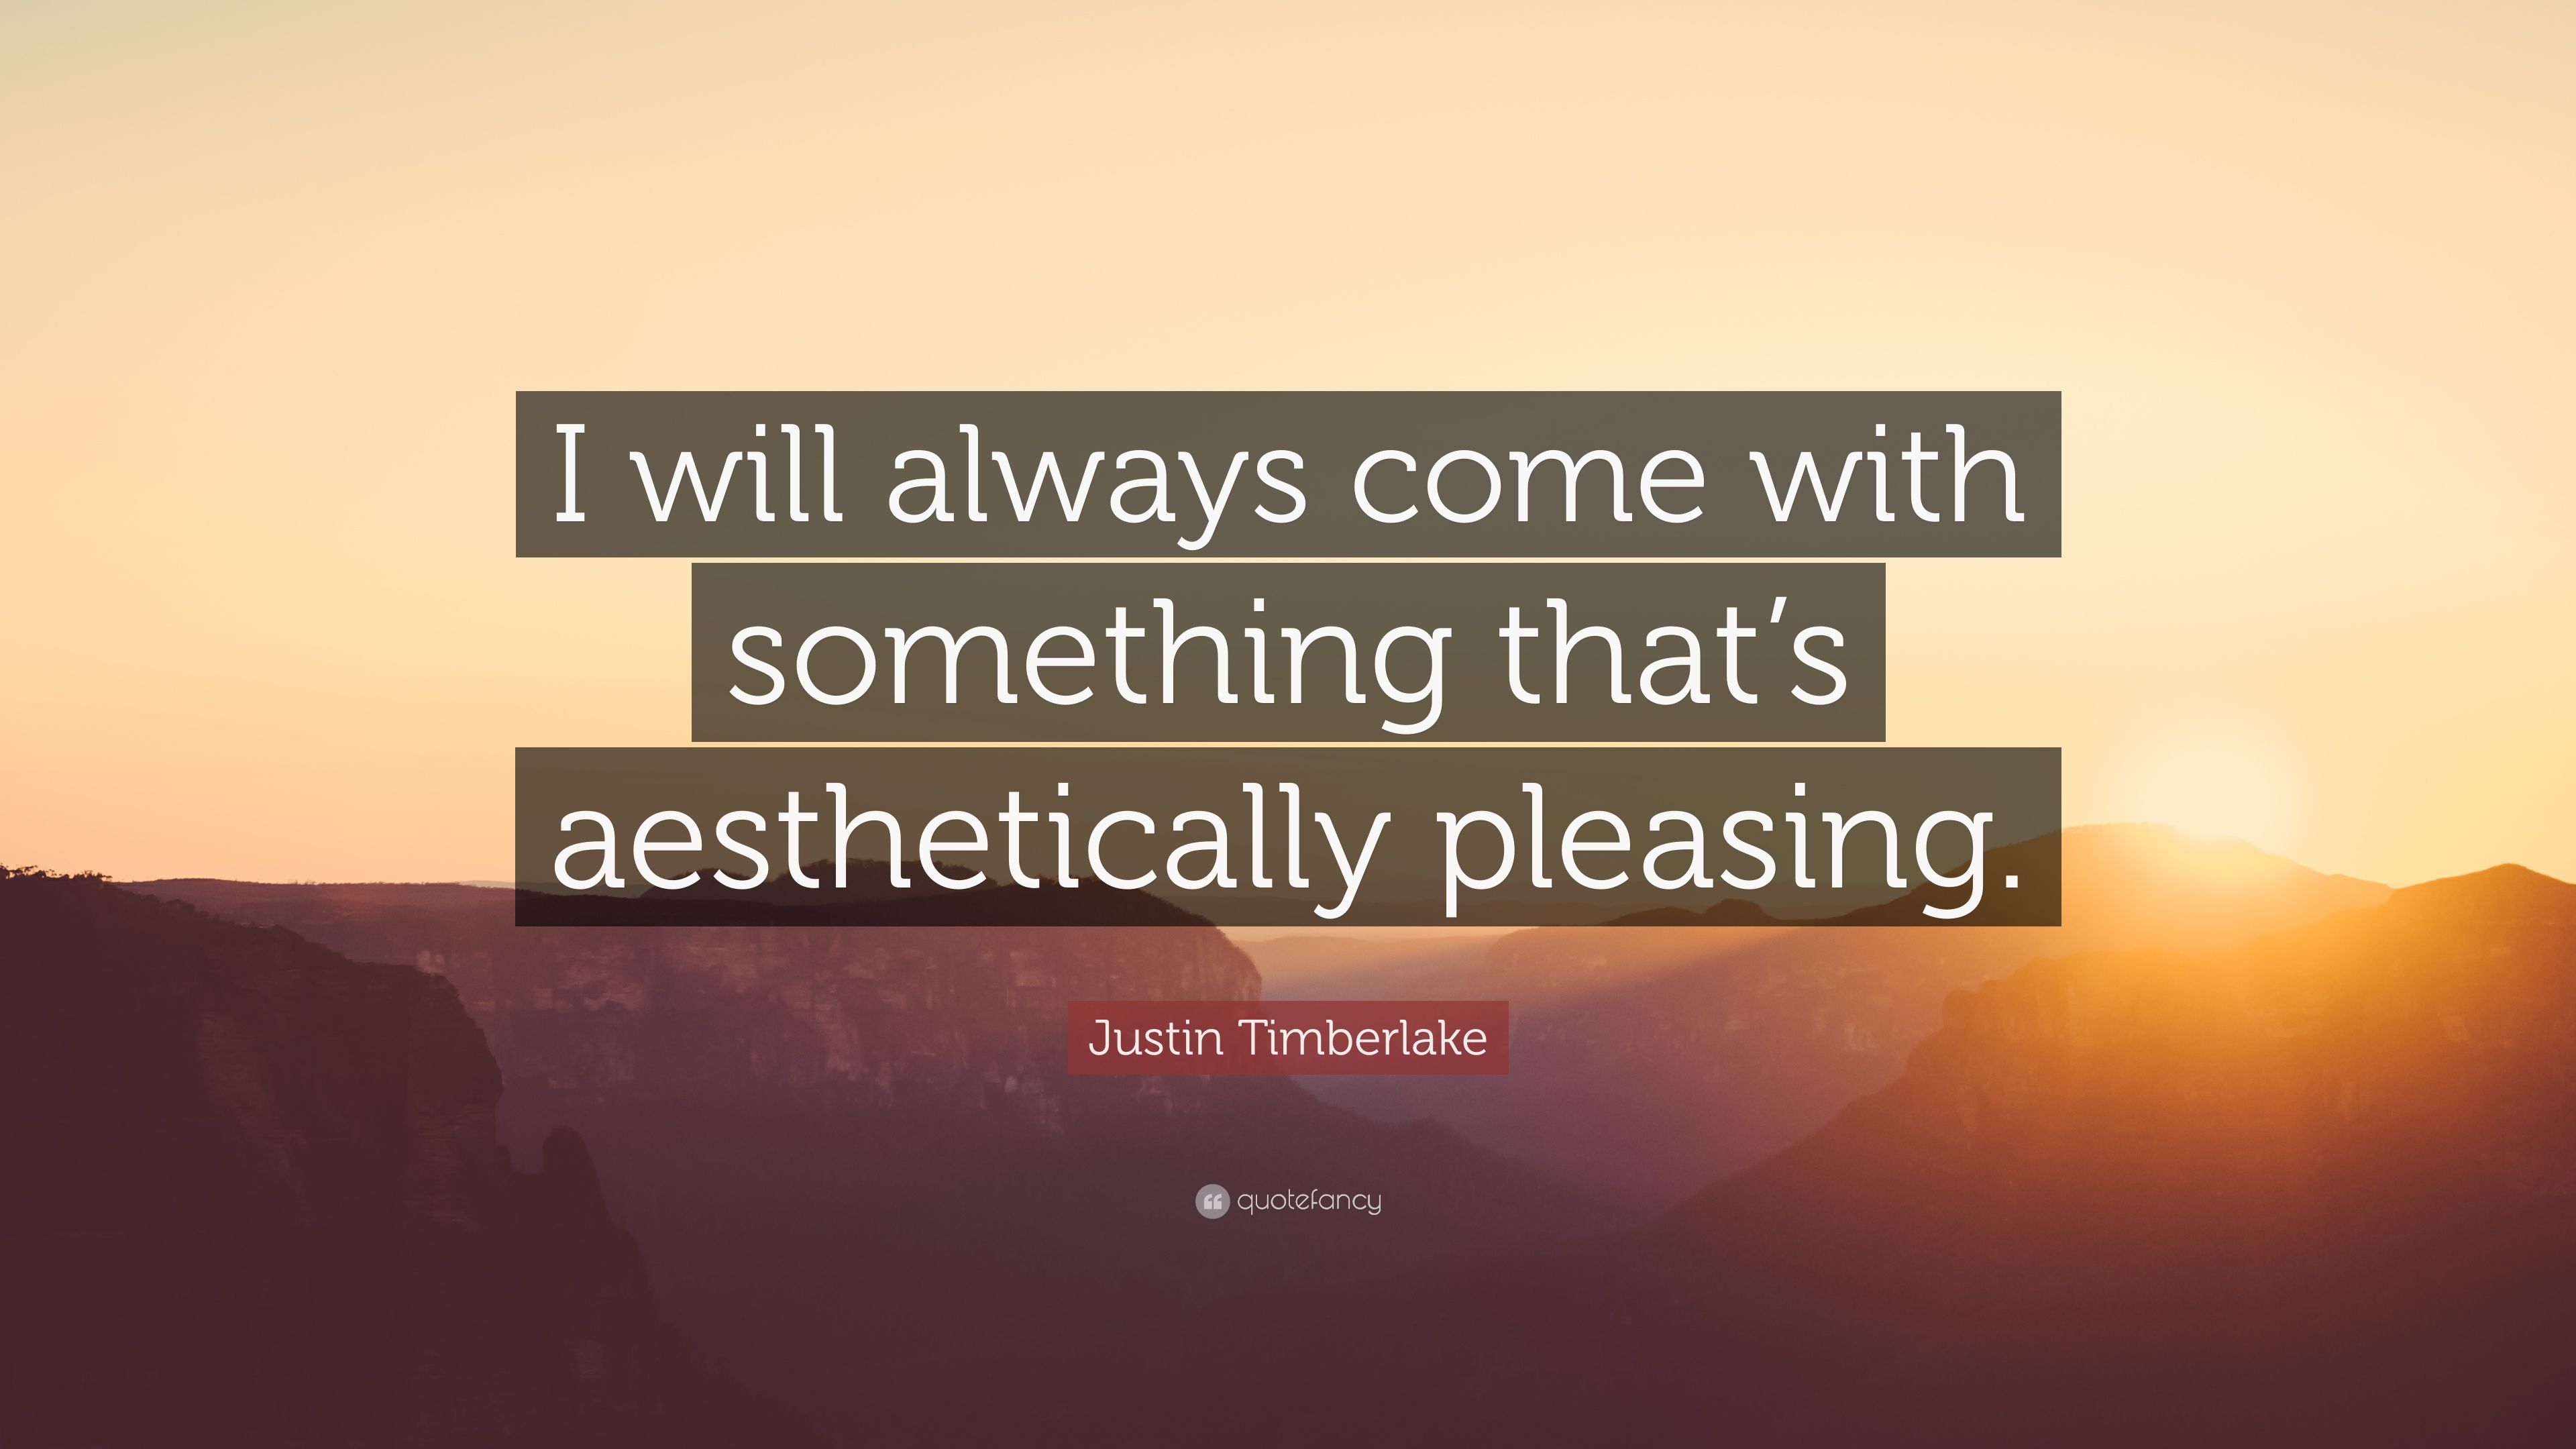 Justin Timberlake Quote: “I will always come with something that's